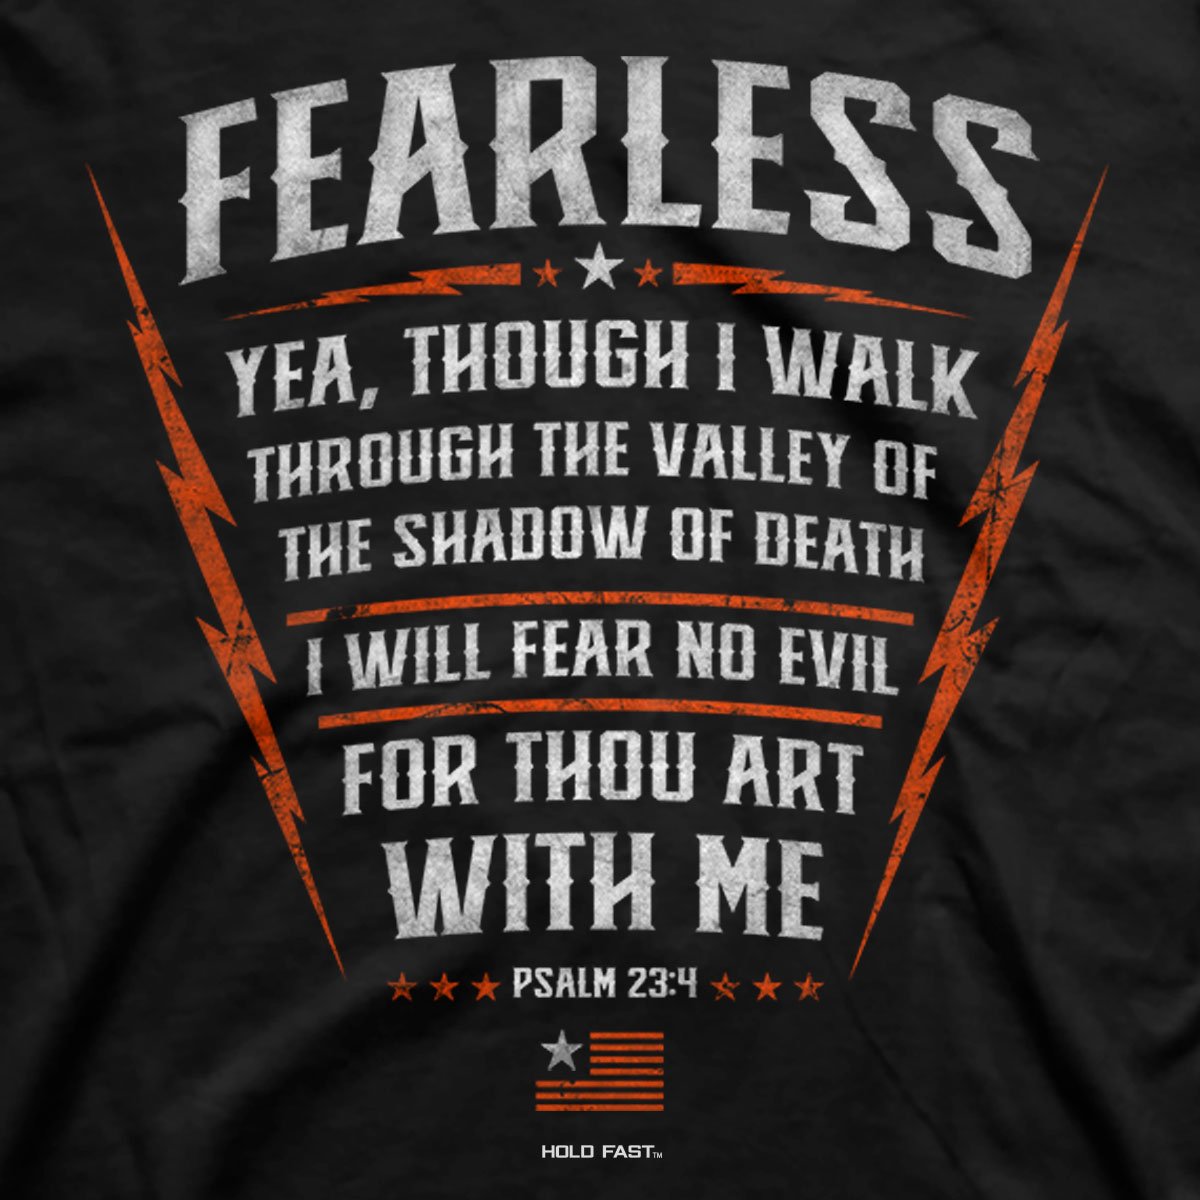 HOLD FAST Christian T-Shirt Psalm 23:4 Fearless By KERUSSO